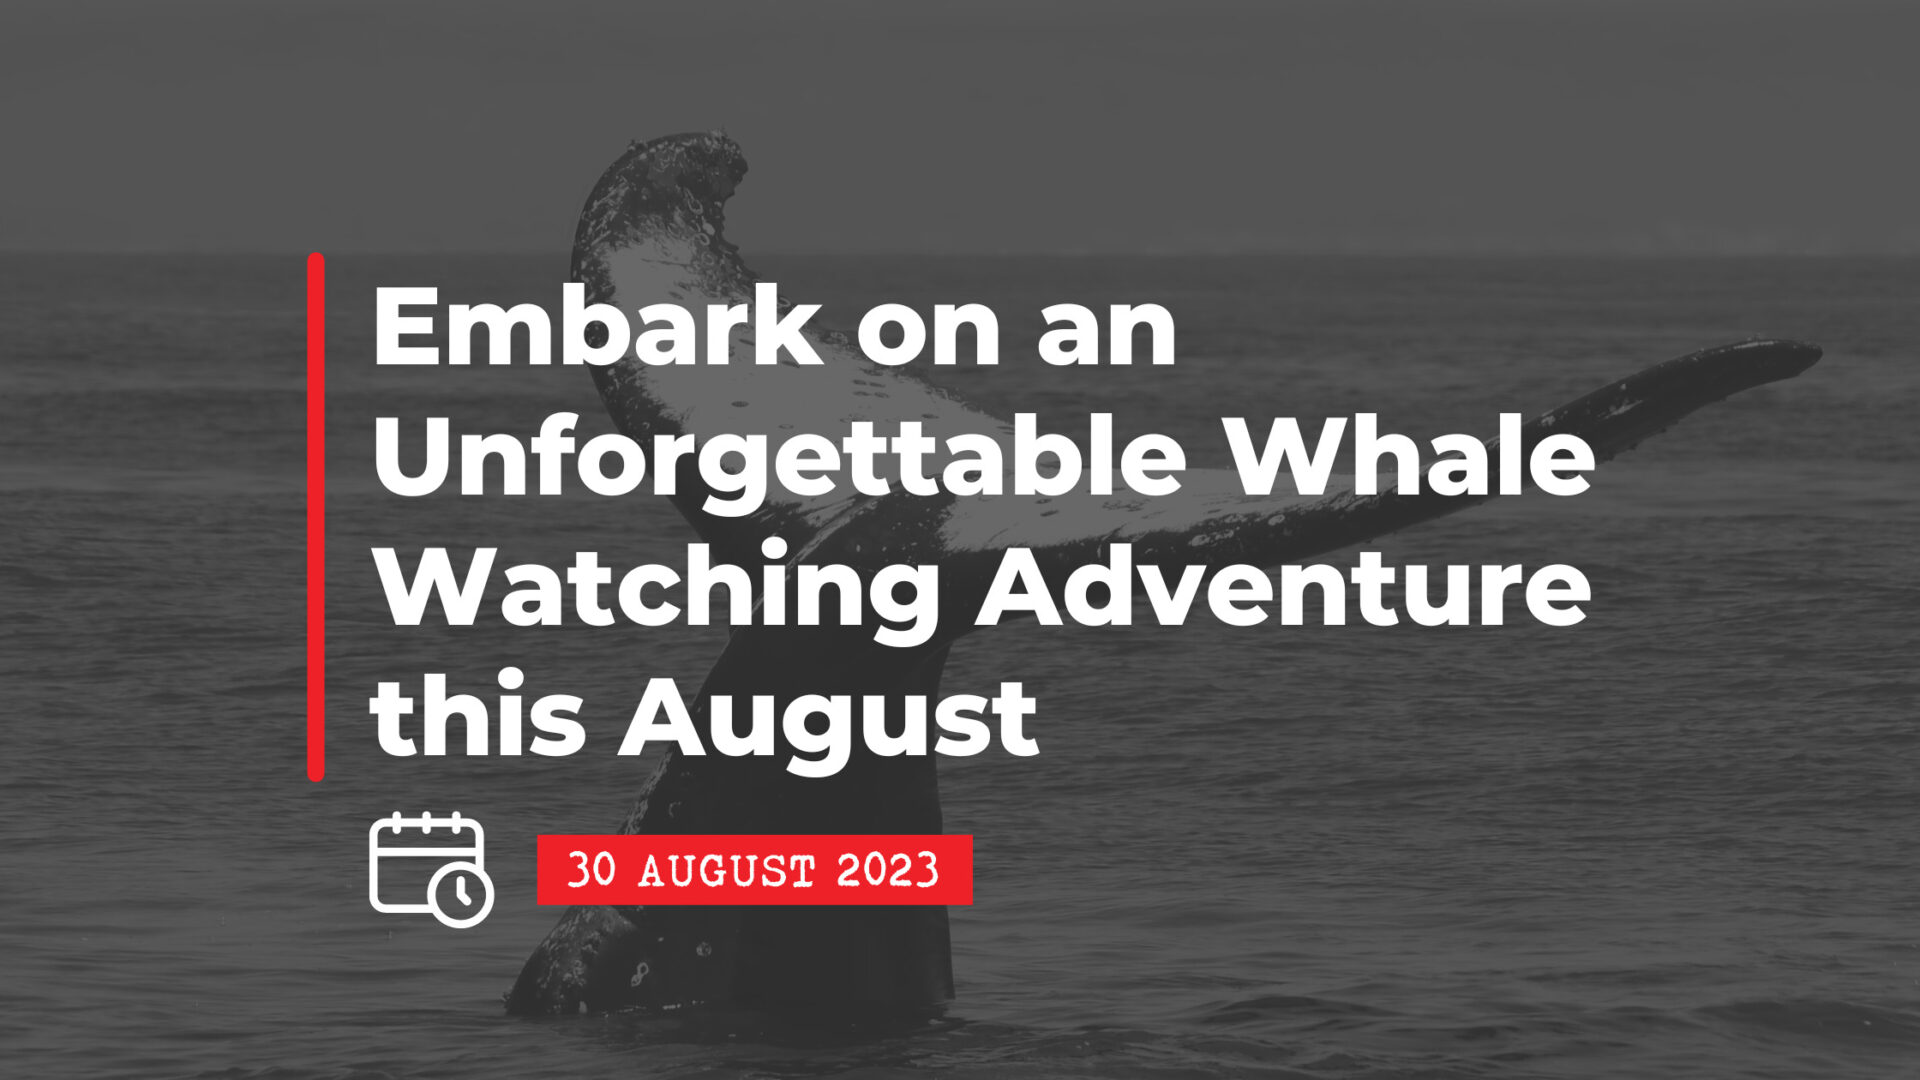 30 August 2023: Embark on an Unforgettable Whale Watching Adventure this August